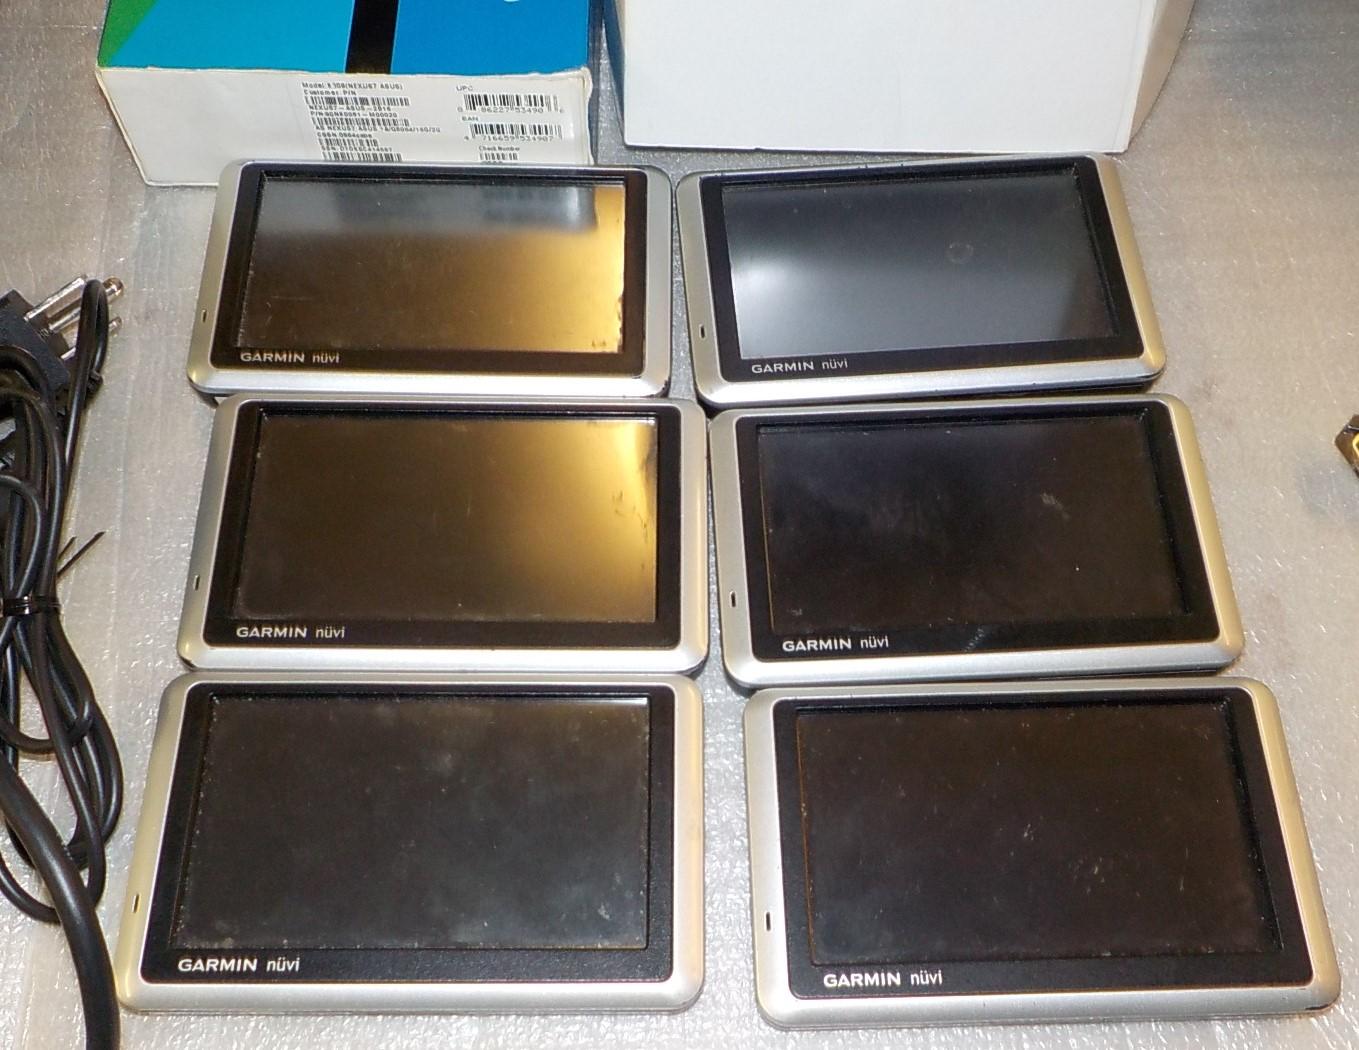 LOT OF NOTEBOOKS, GARMIN NUVI AND MORE PORTABLE ELECTRONICS